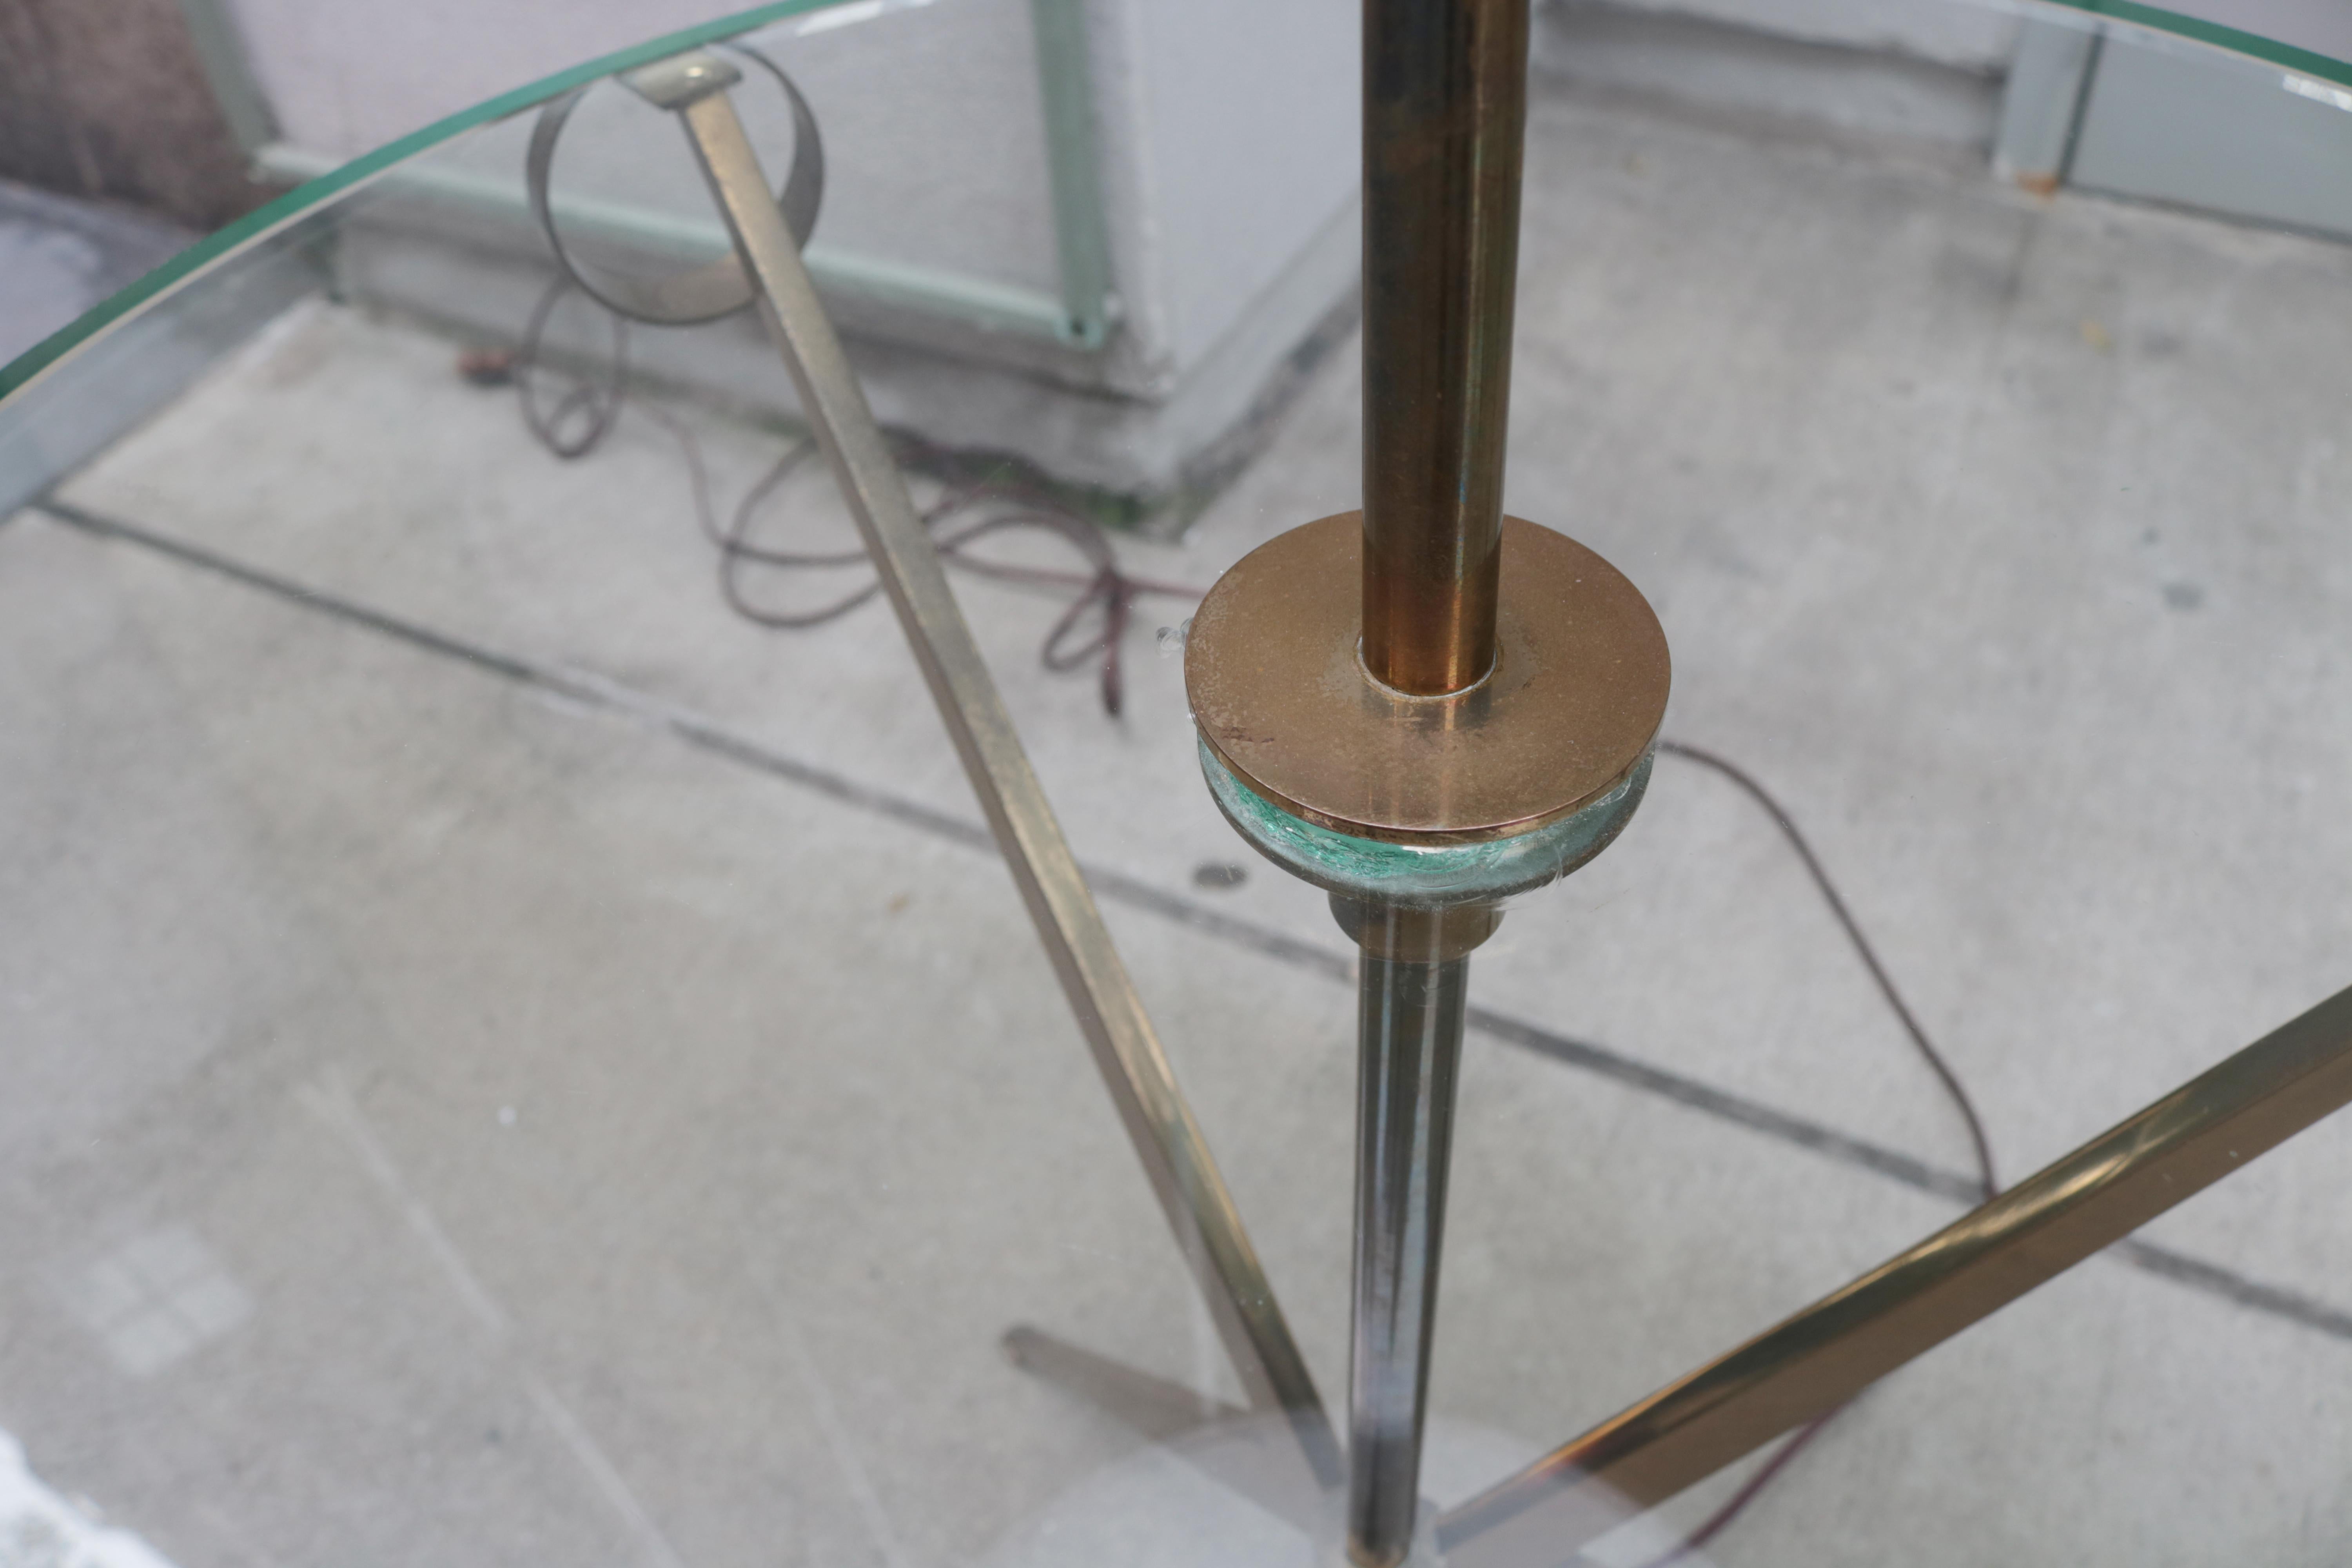 Matched Pair of Modernist Floor Lamp Tables Attributed to Paul McCobb 1